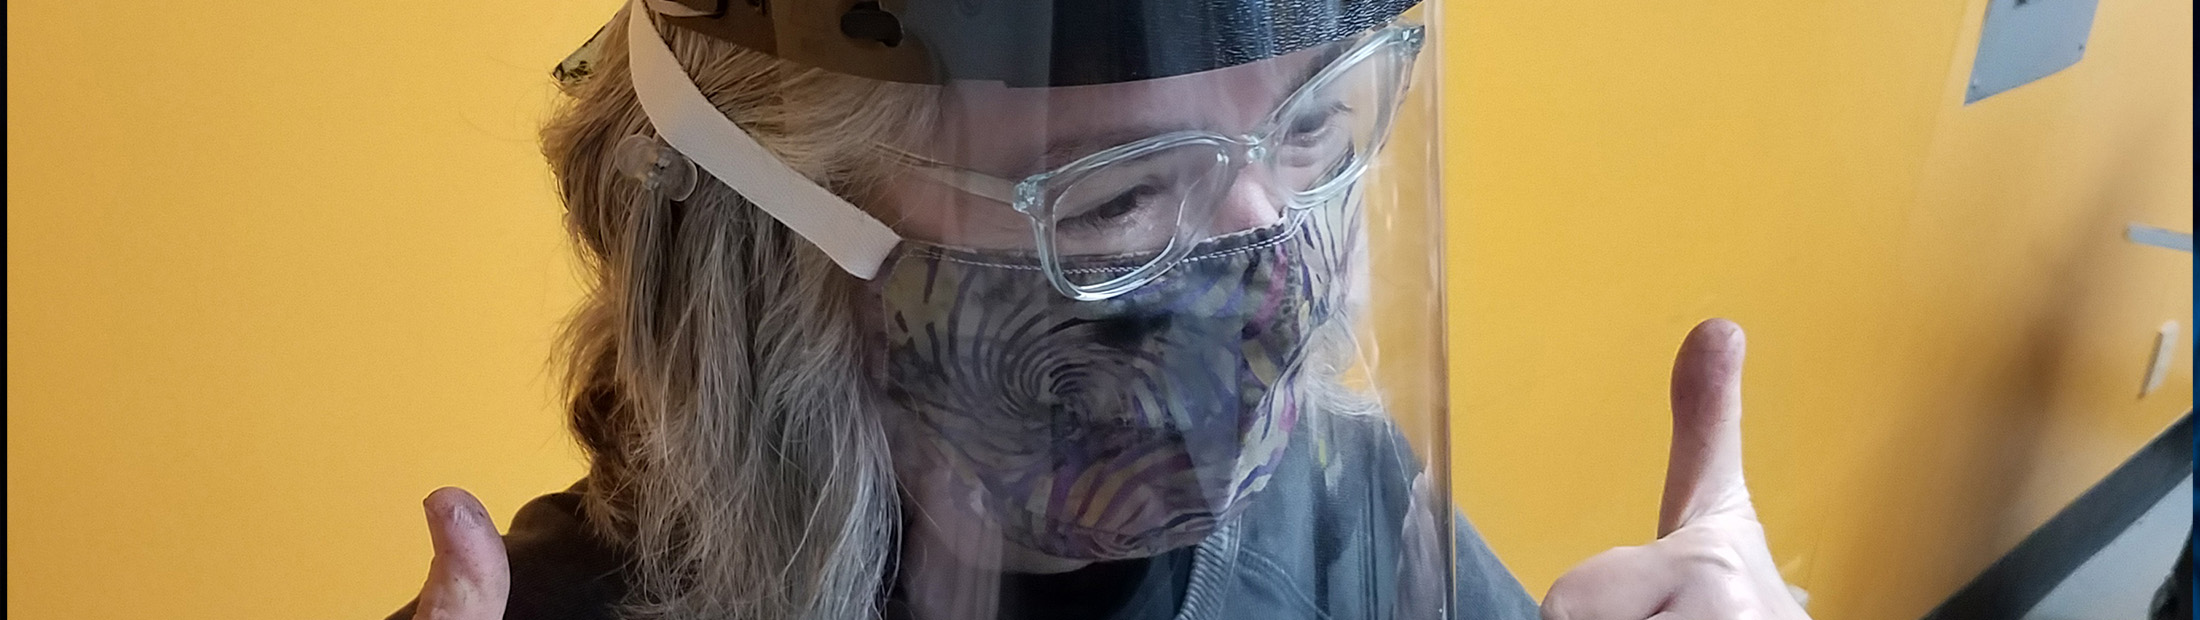 Volunteer trying on face shield